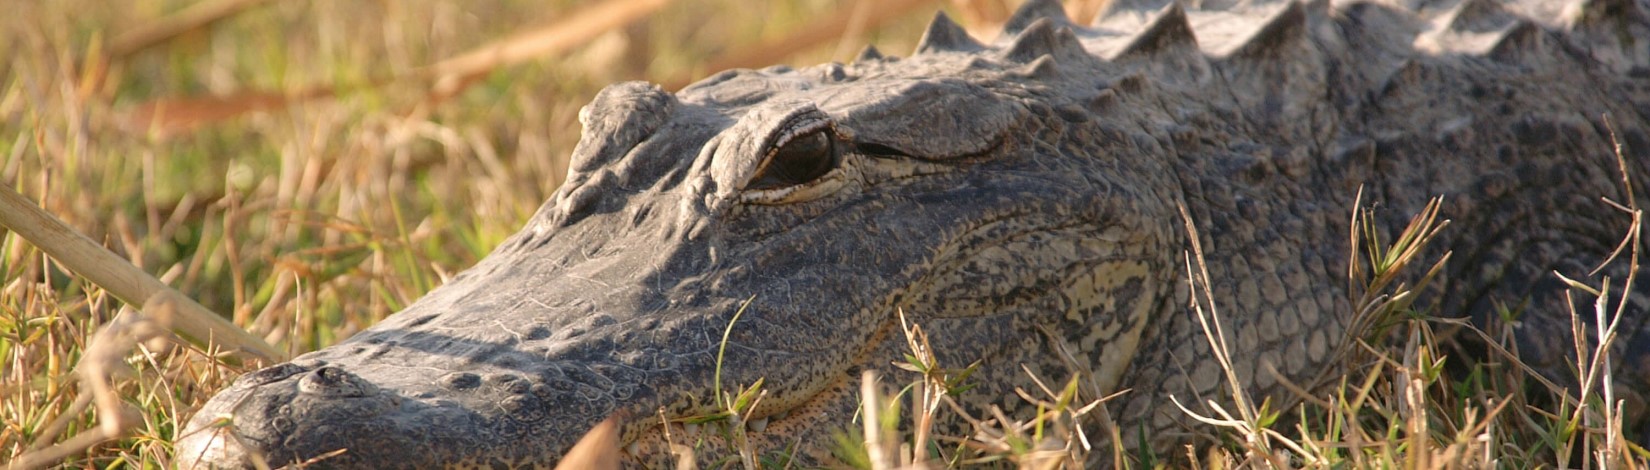 An alligator laying down